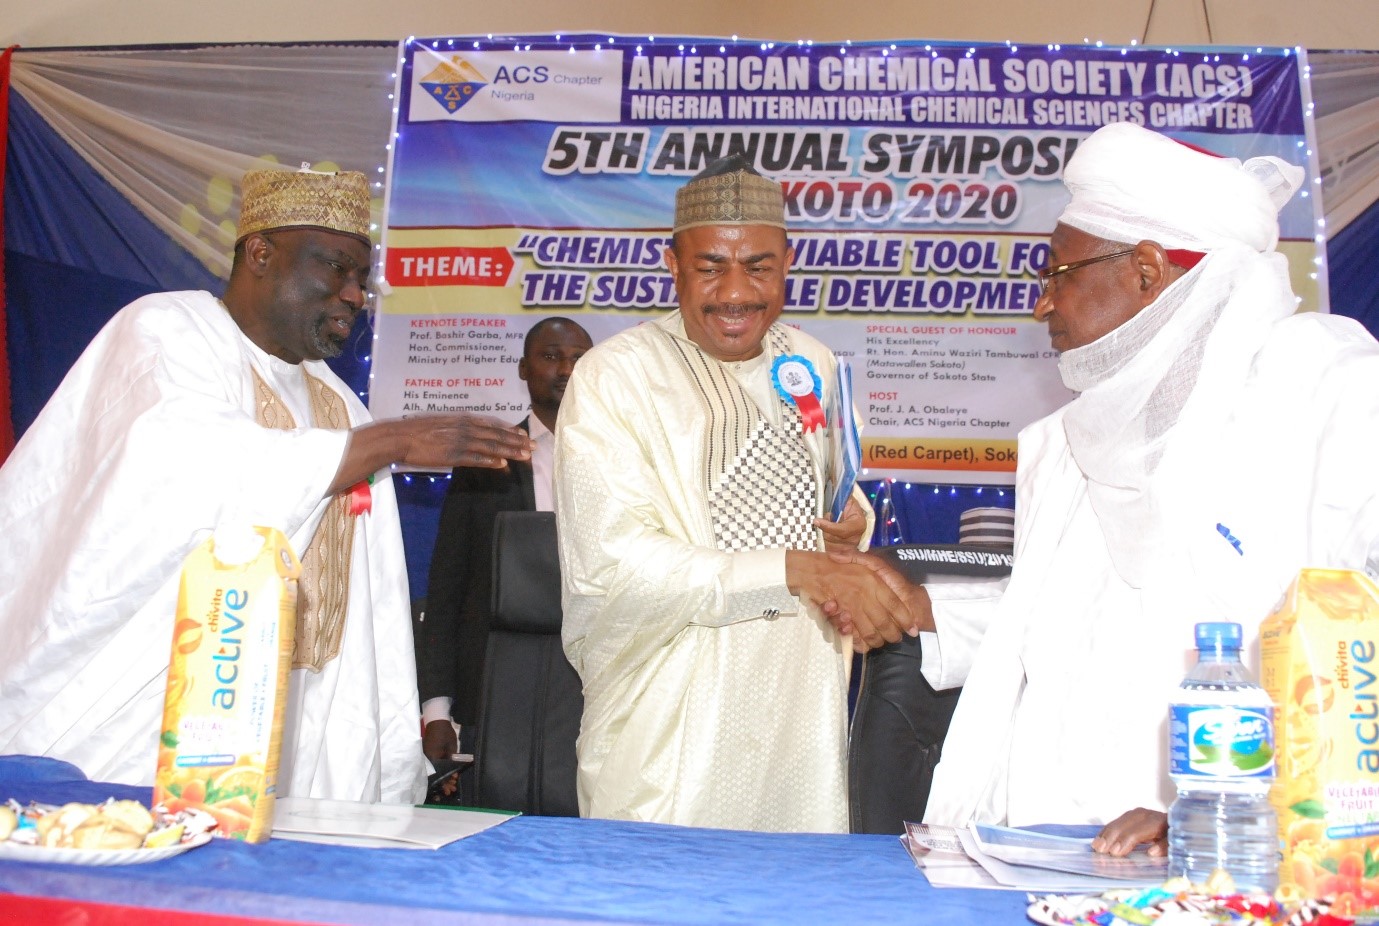 American Chemical Society (ACS) Nigeria Chapter